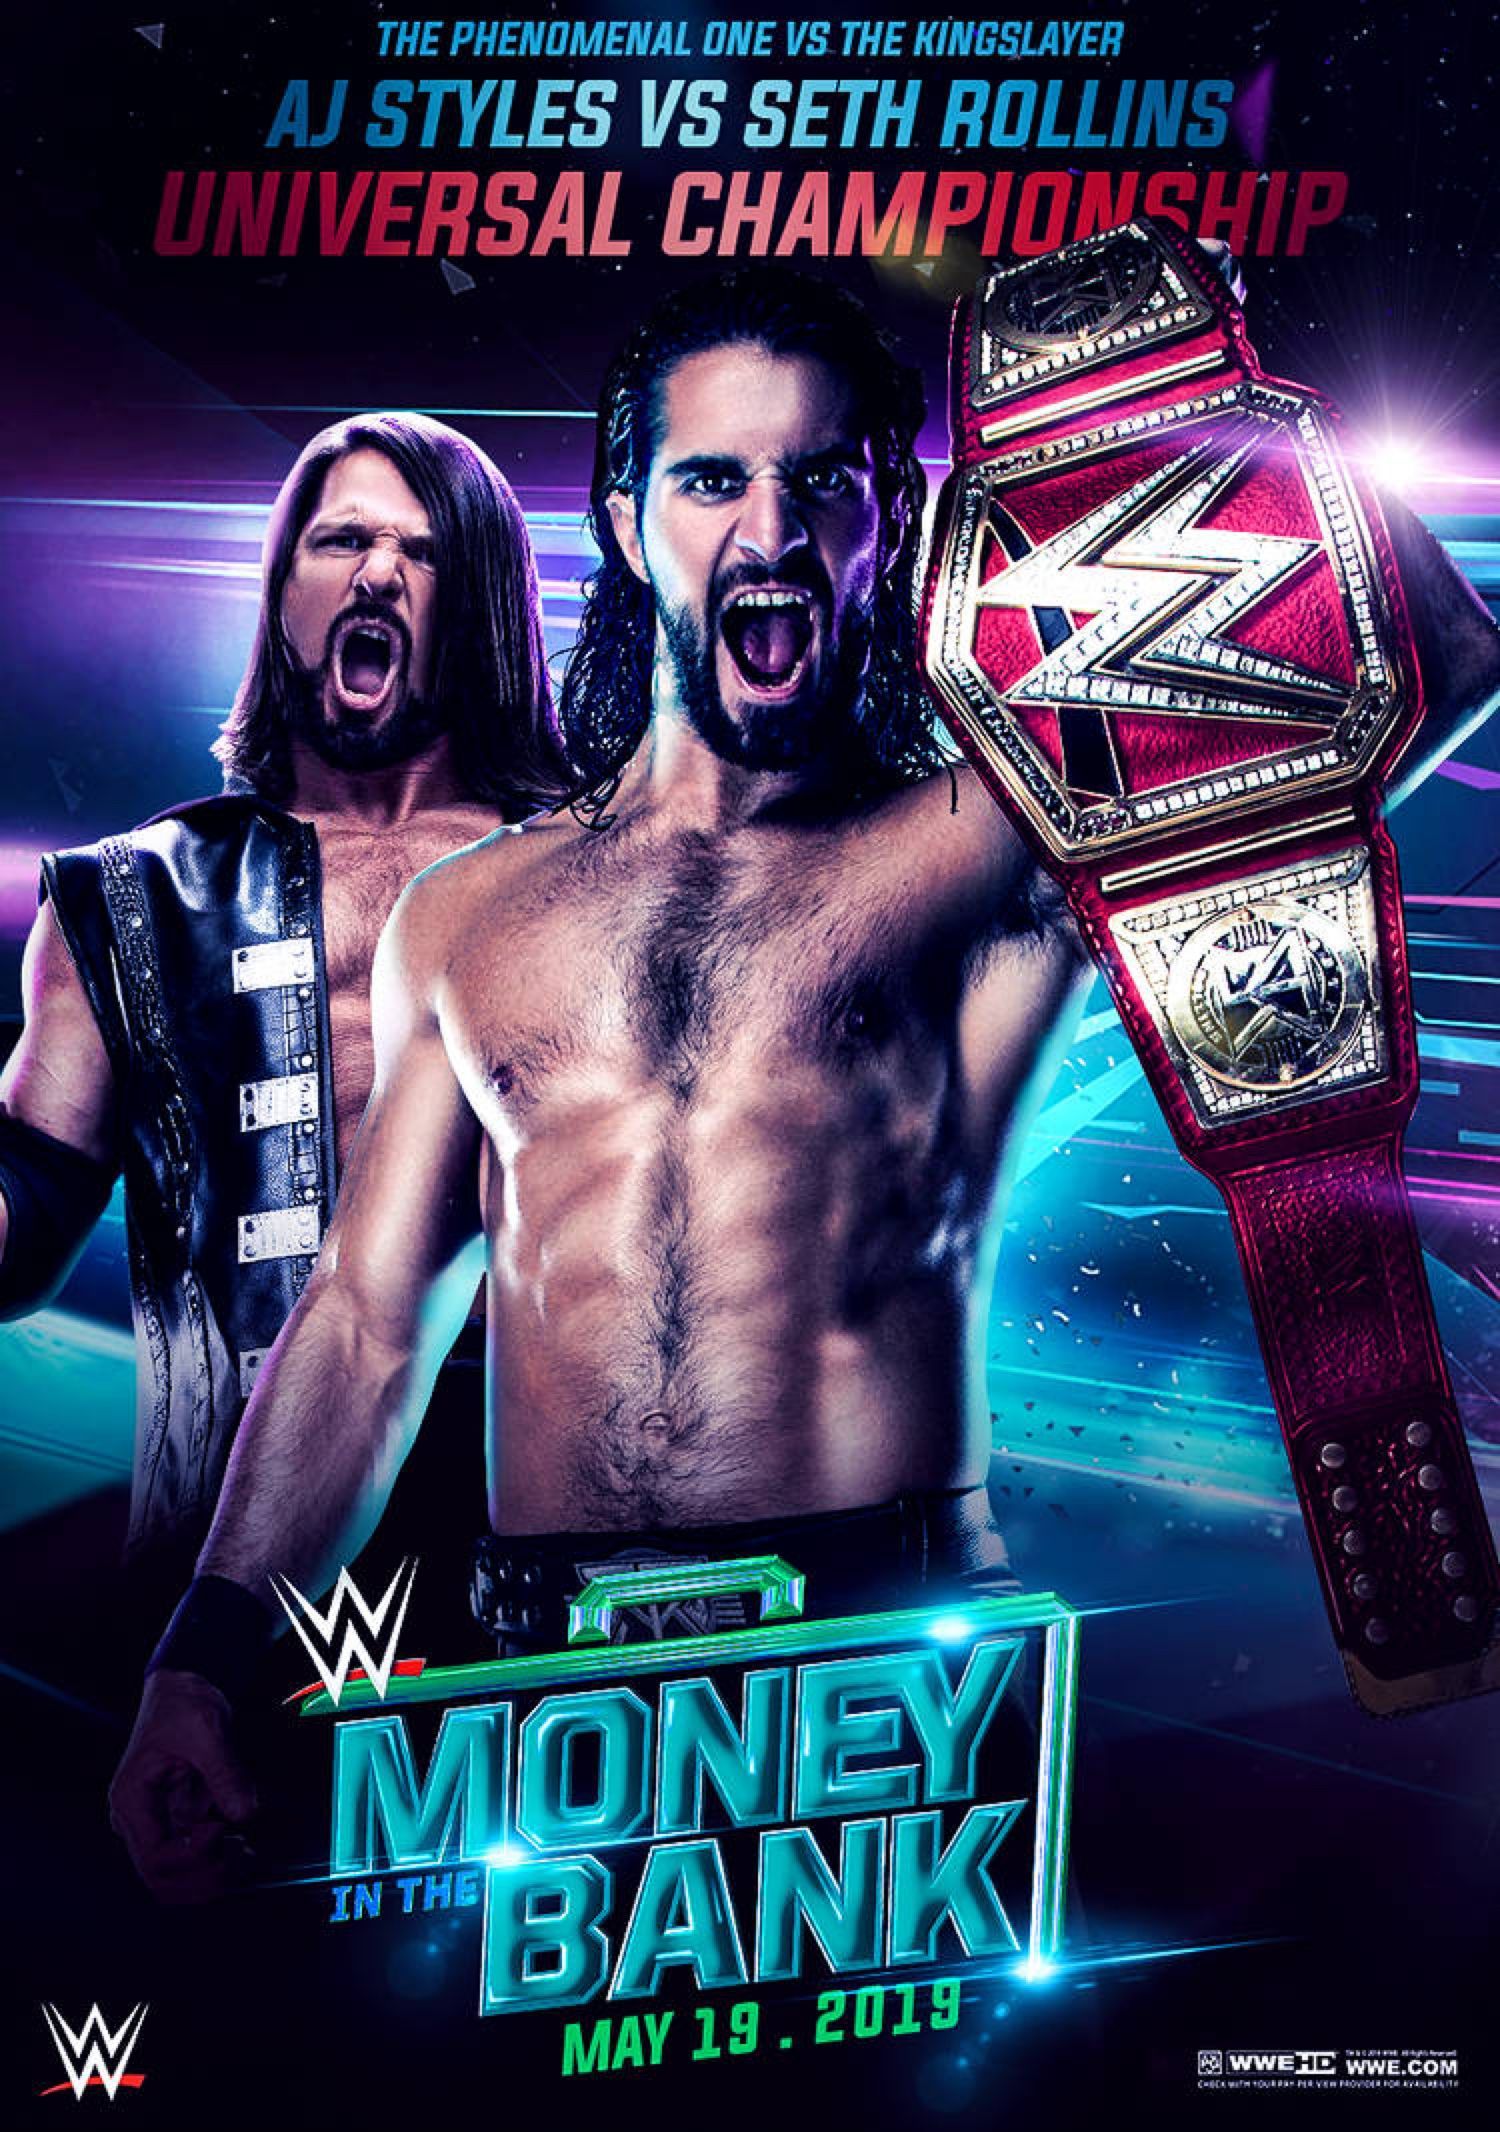 WWE Money in the Bank 2019 Poster. Wwe money, Money in the bank, Wwe